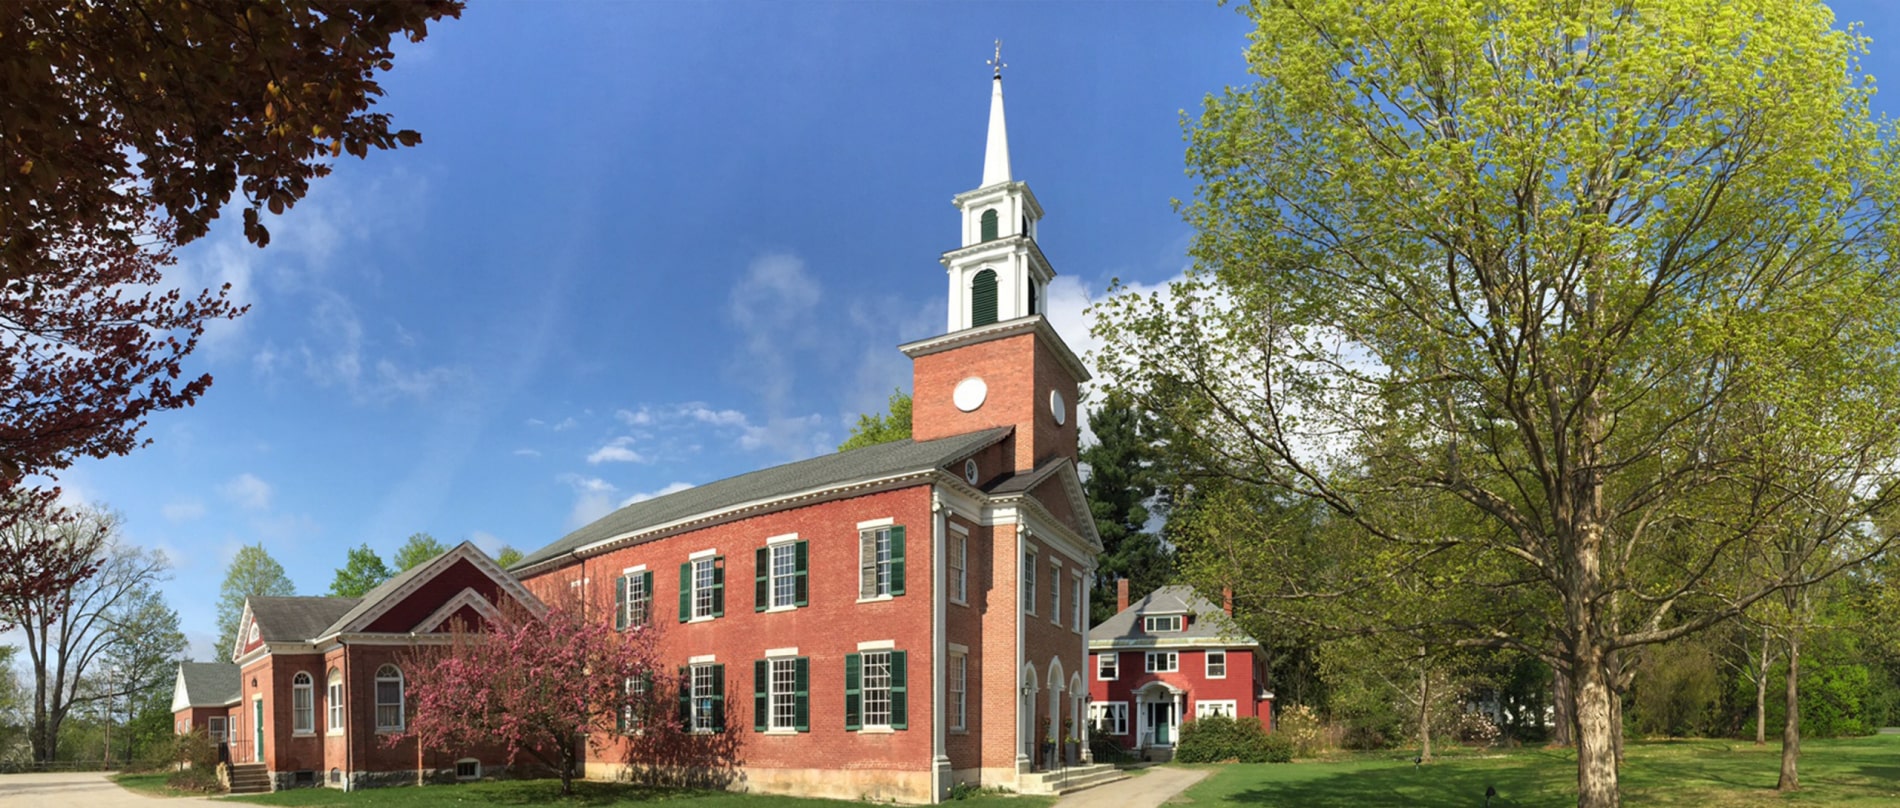 Exterior image of the historic 1824 congregational church in Stockbridge. A brick building with green shutters and a tall white steeple.